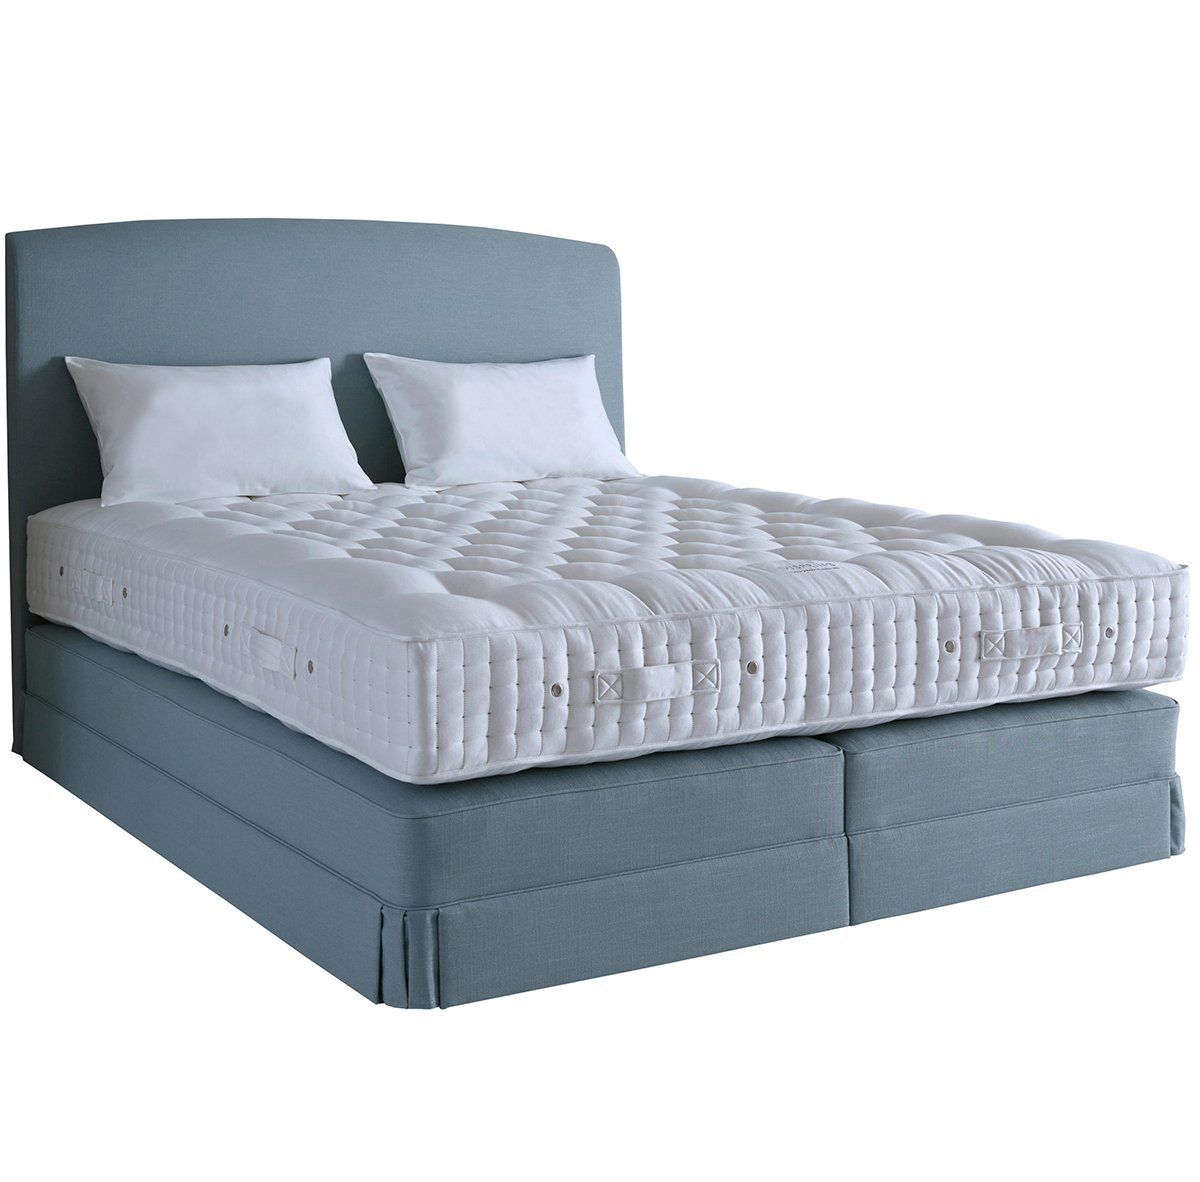 Double bed 180x200 grey Signature